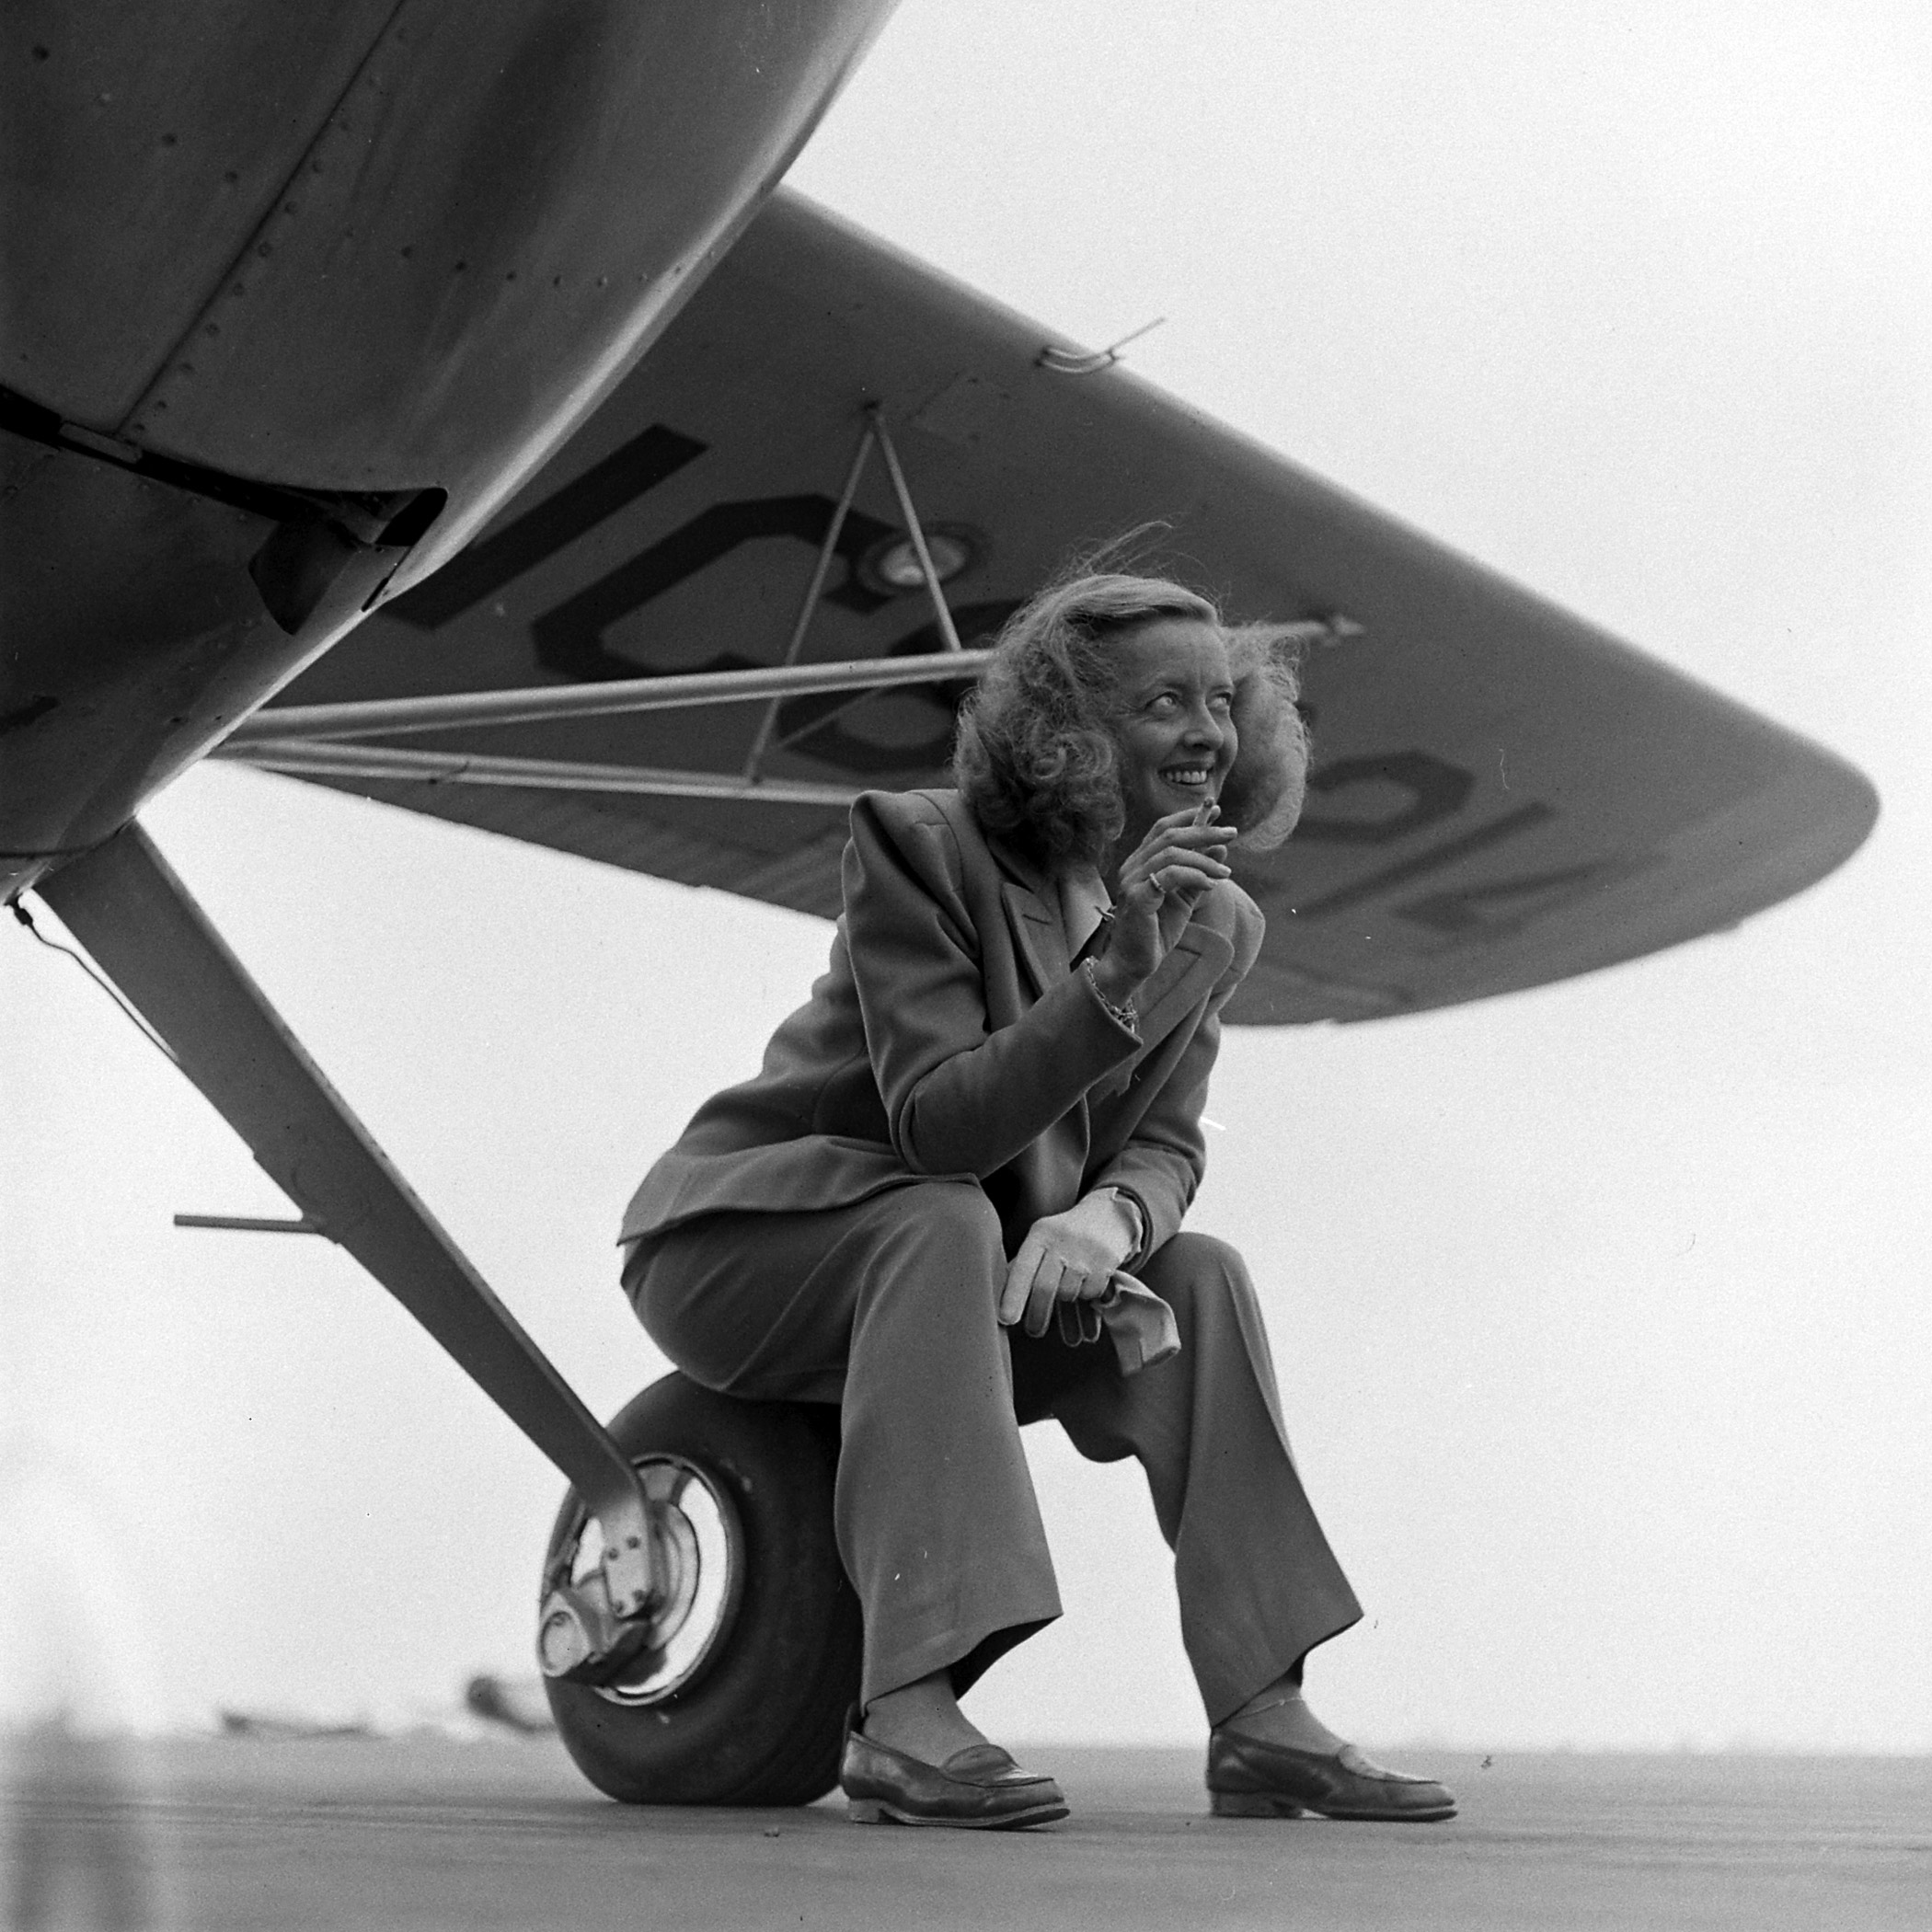 Bette Davis smoking and sitting on the wheel of a plane, 1947.